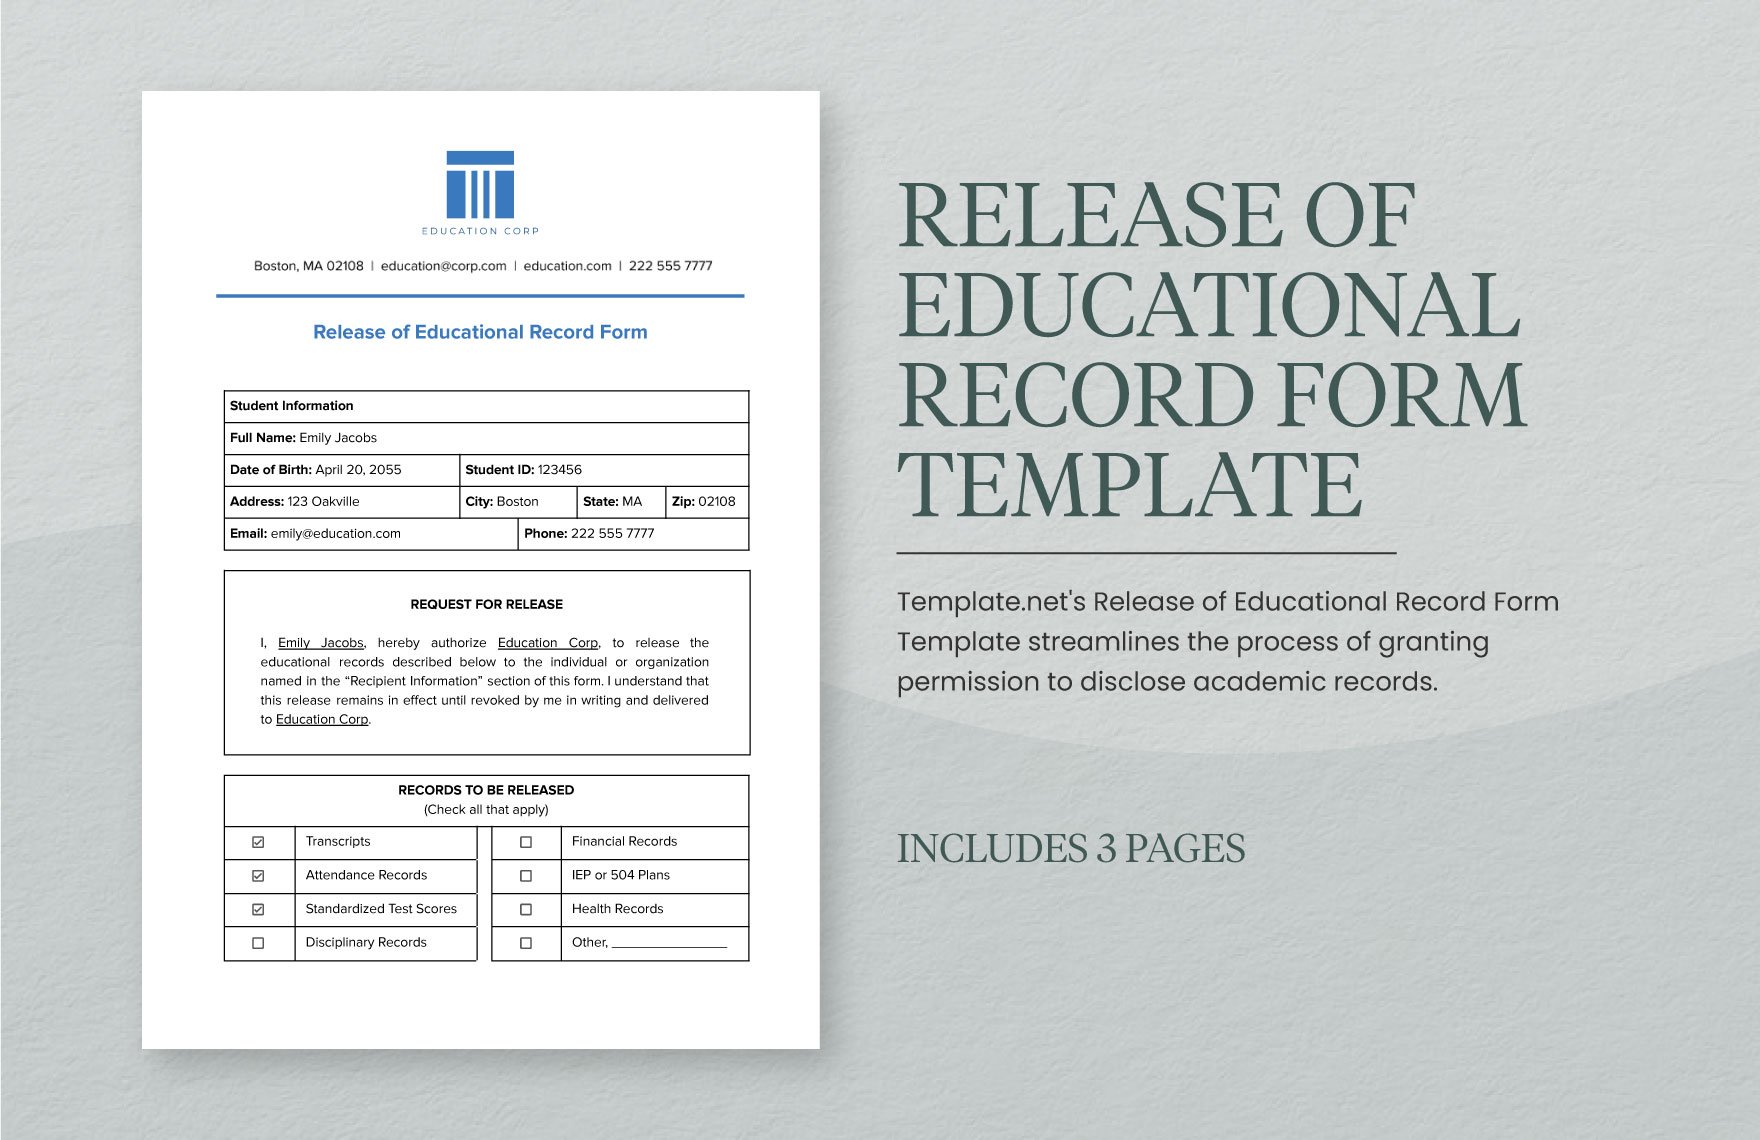 Release of Educational Record Form Template in Word, Google Docs, PDF